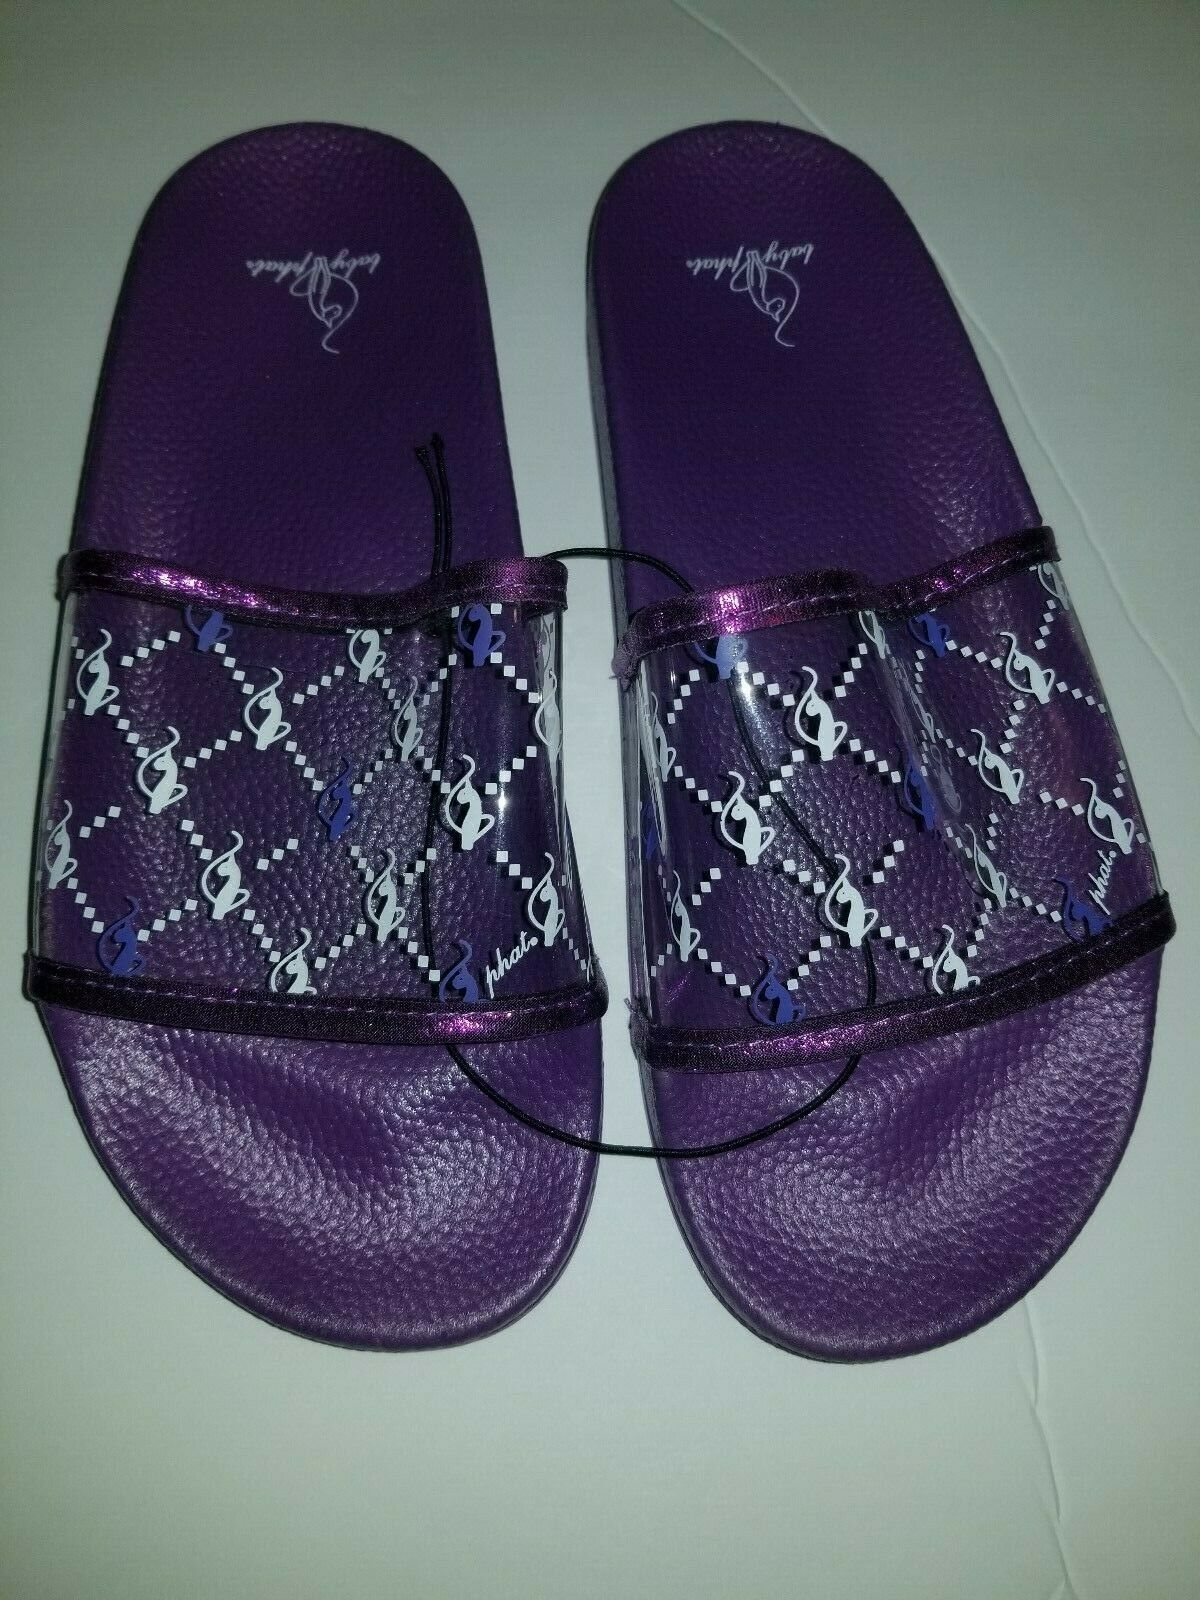 NWT Womens Baby Phat Holographic Slides Sandals Sizes 8, 9, 10, 11 | eBay